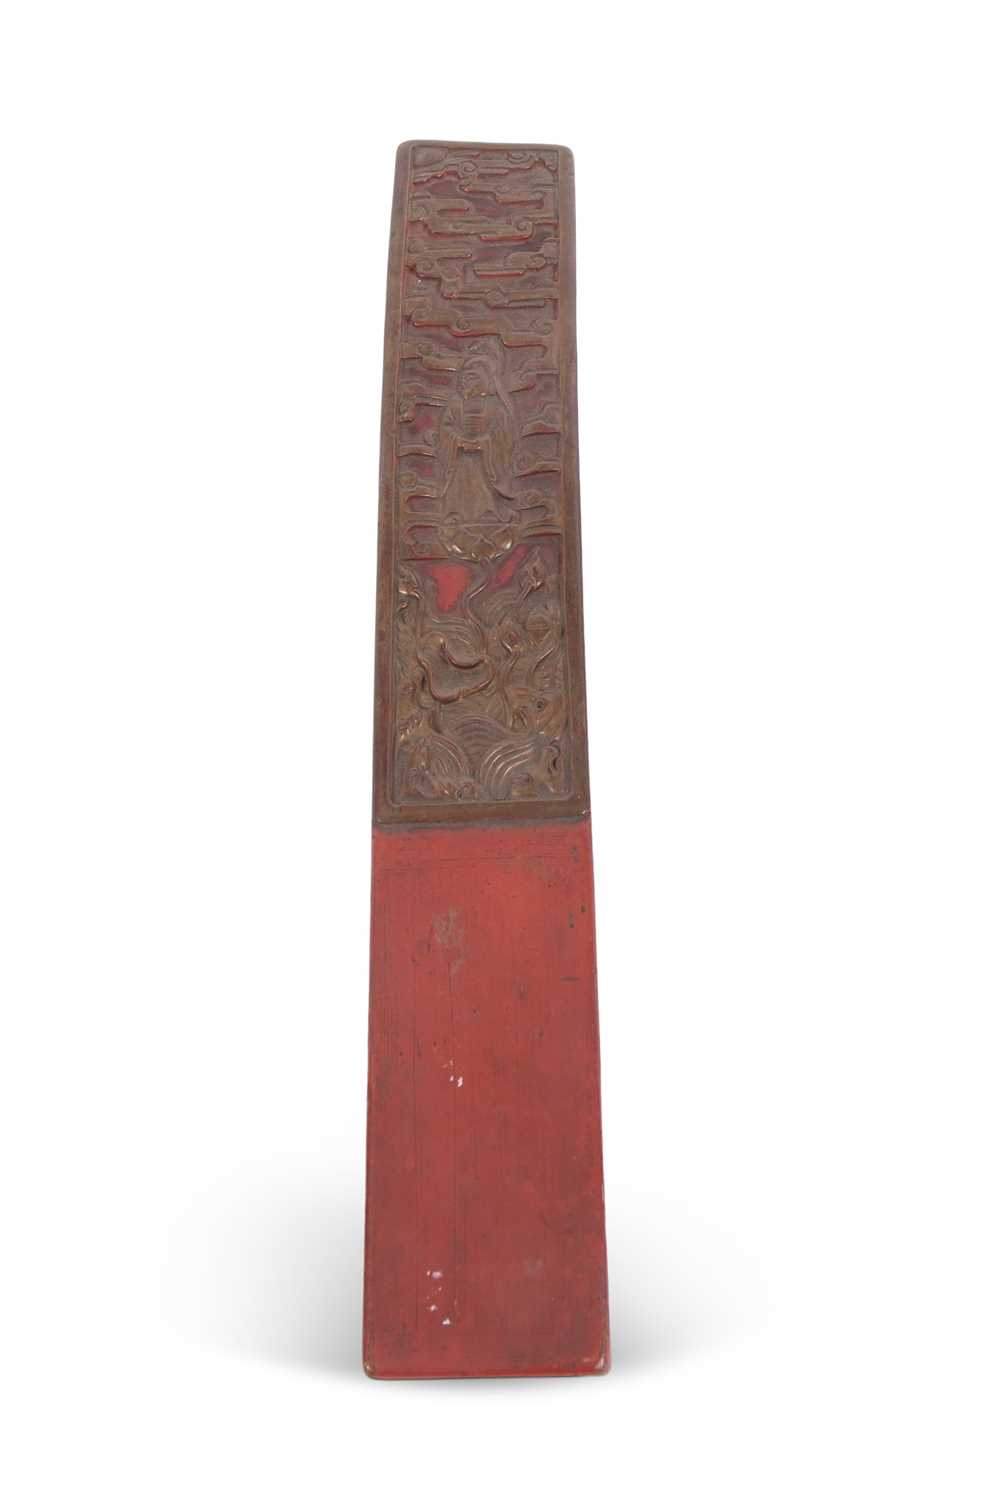 A wooden Priests sleeve carved with a Chinese dignitary amongst flowers, 43cm long